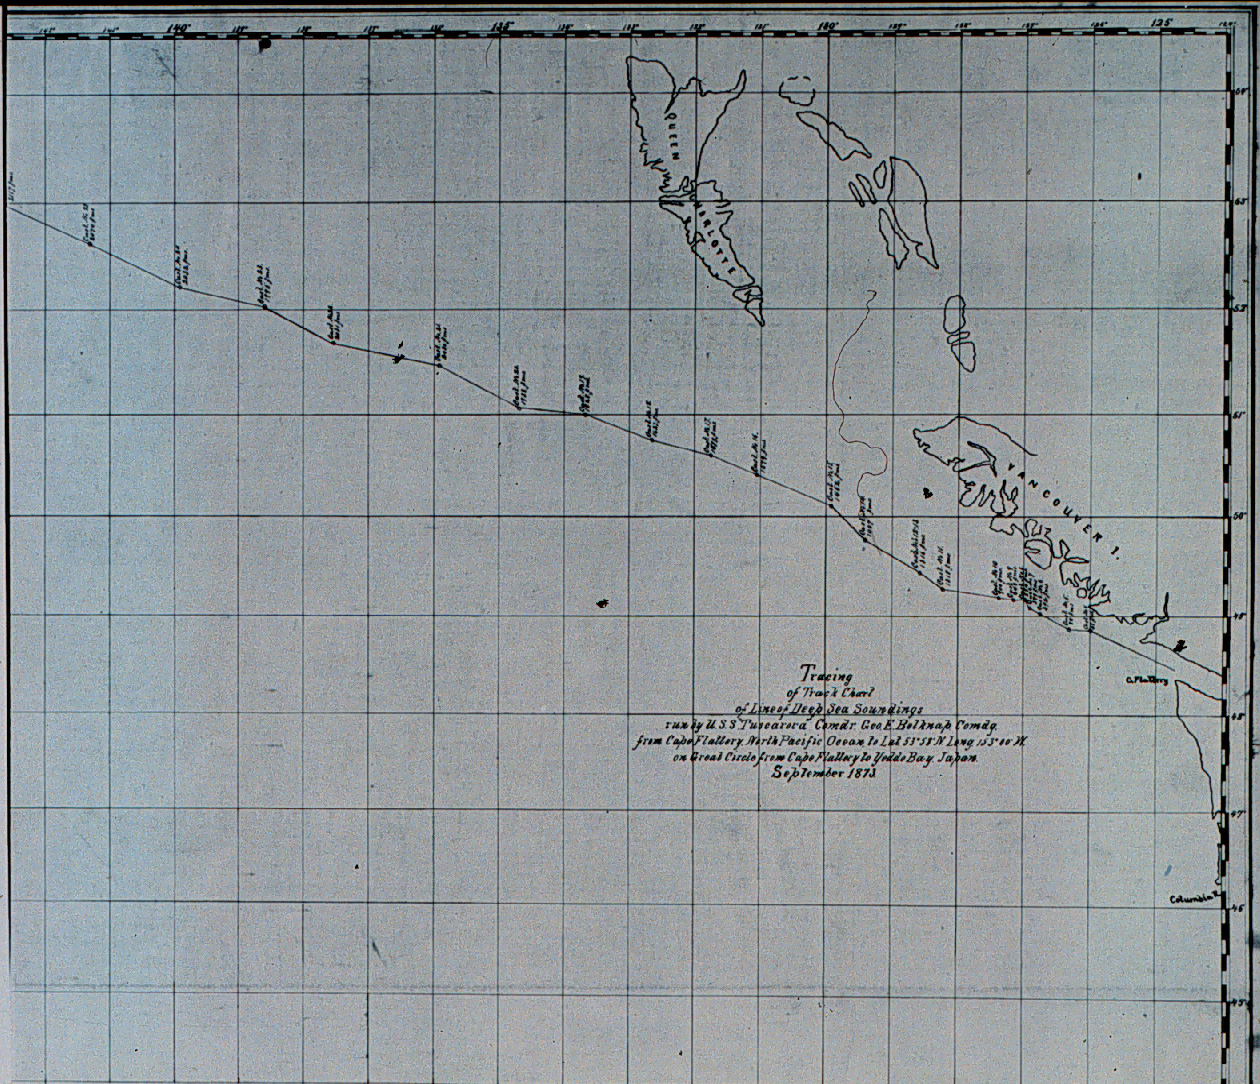  Track of USS TUSCARORA from Cape Flattery to Japan